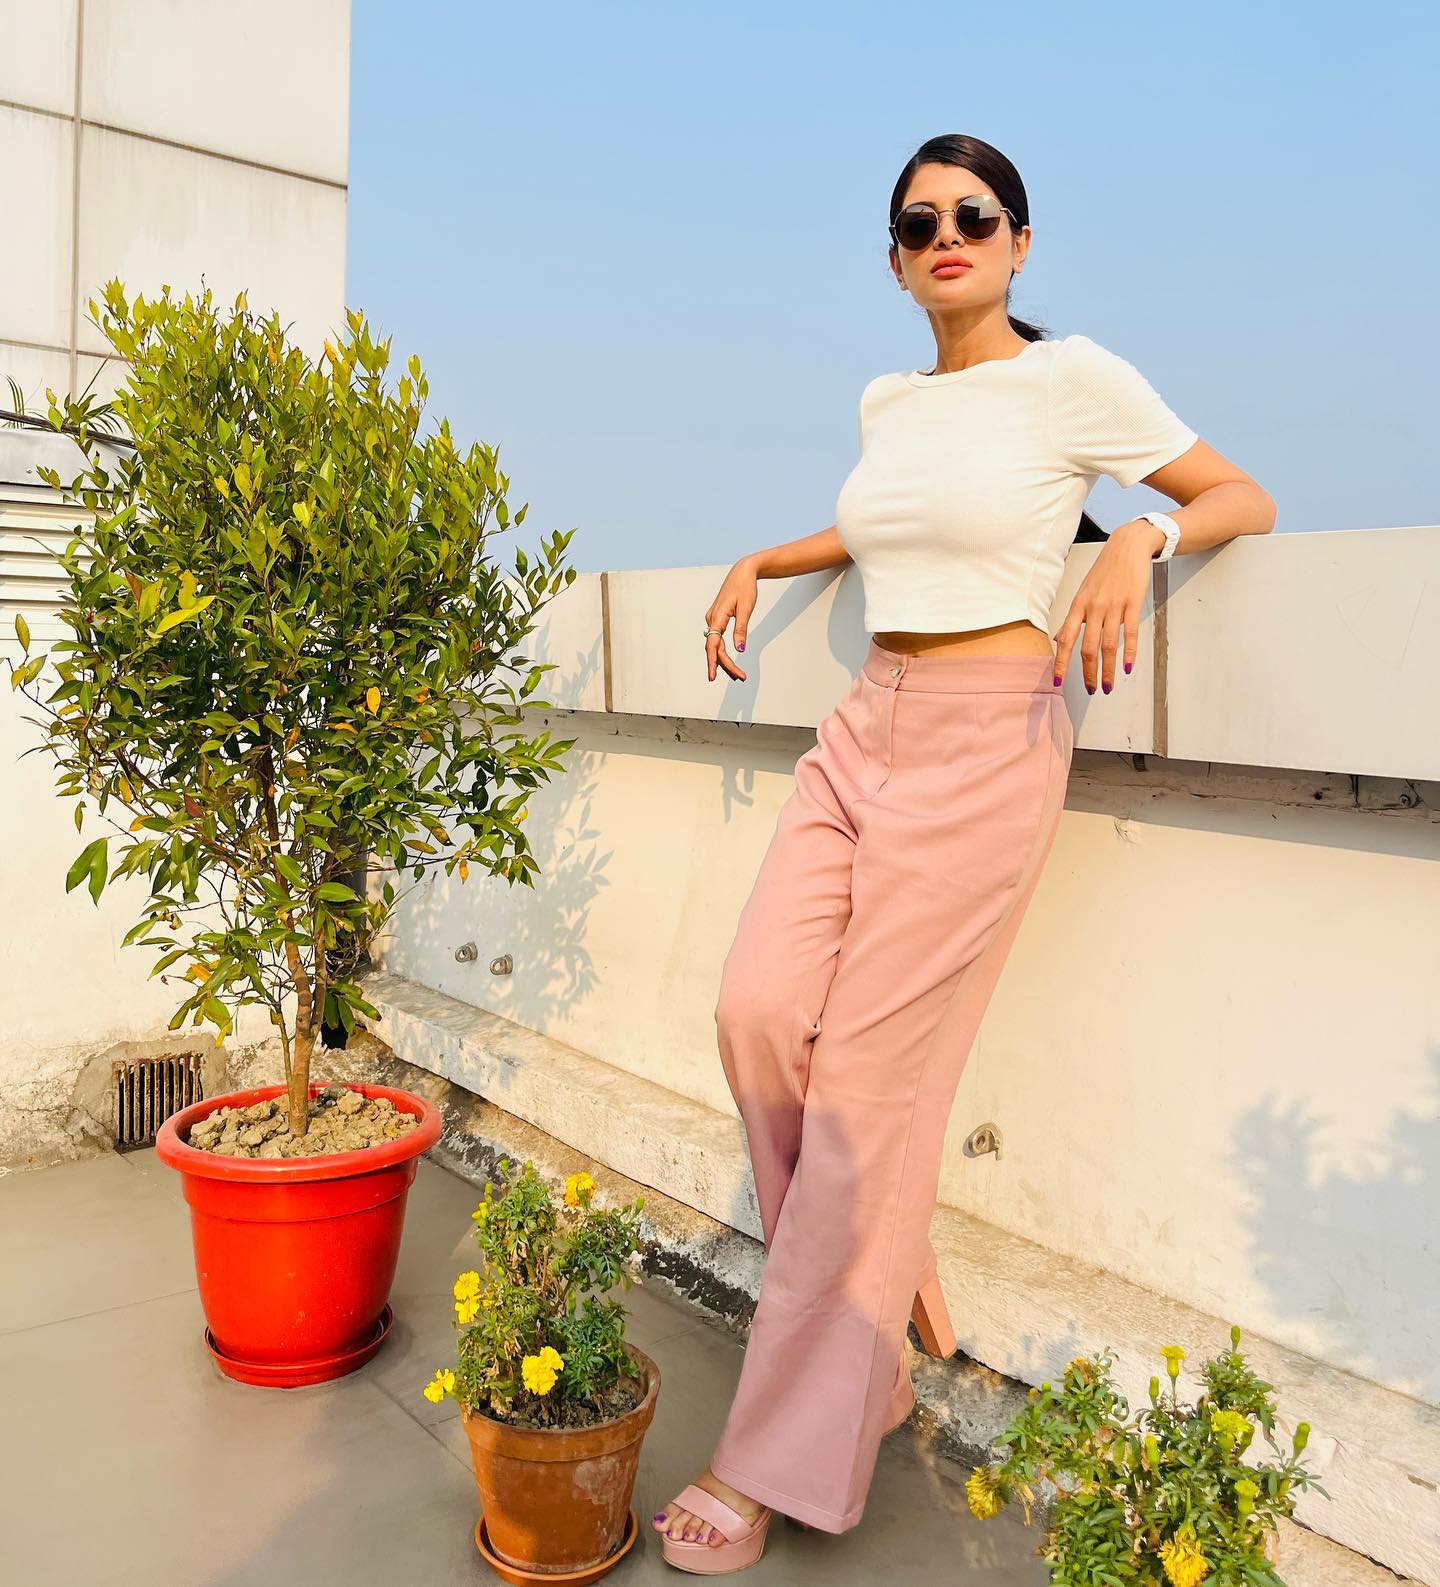 Madhumita-Sarcar-looks-cute-and-alluring-in-crop-top-See-the-PICS-08-Bengalplanet.com